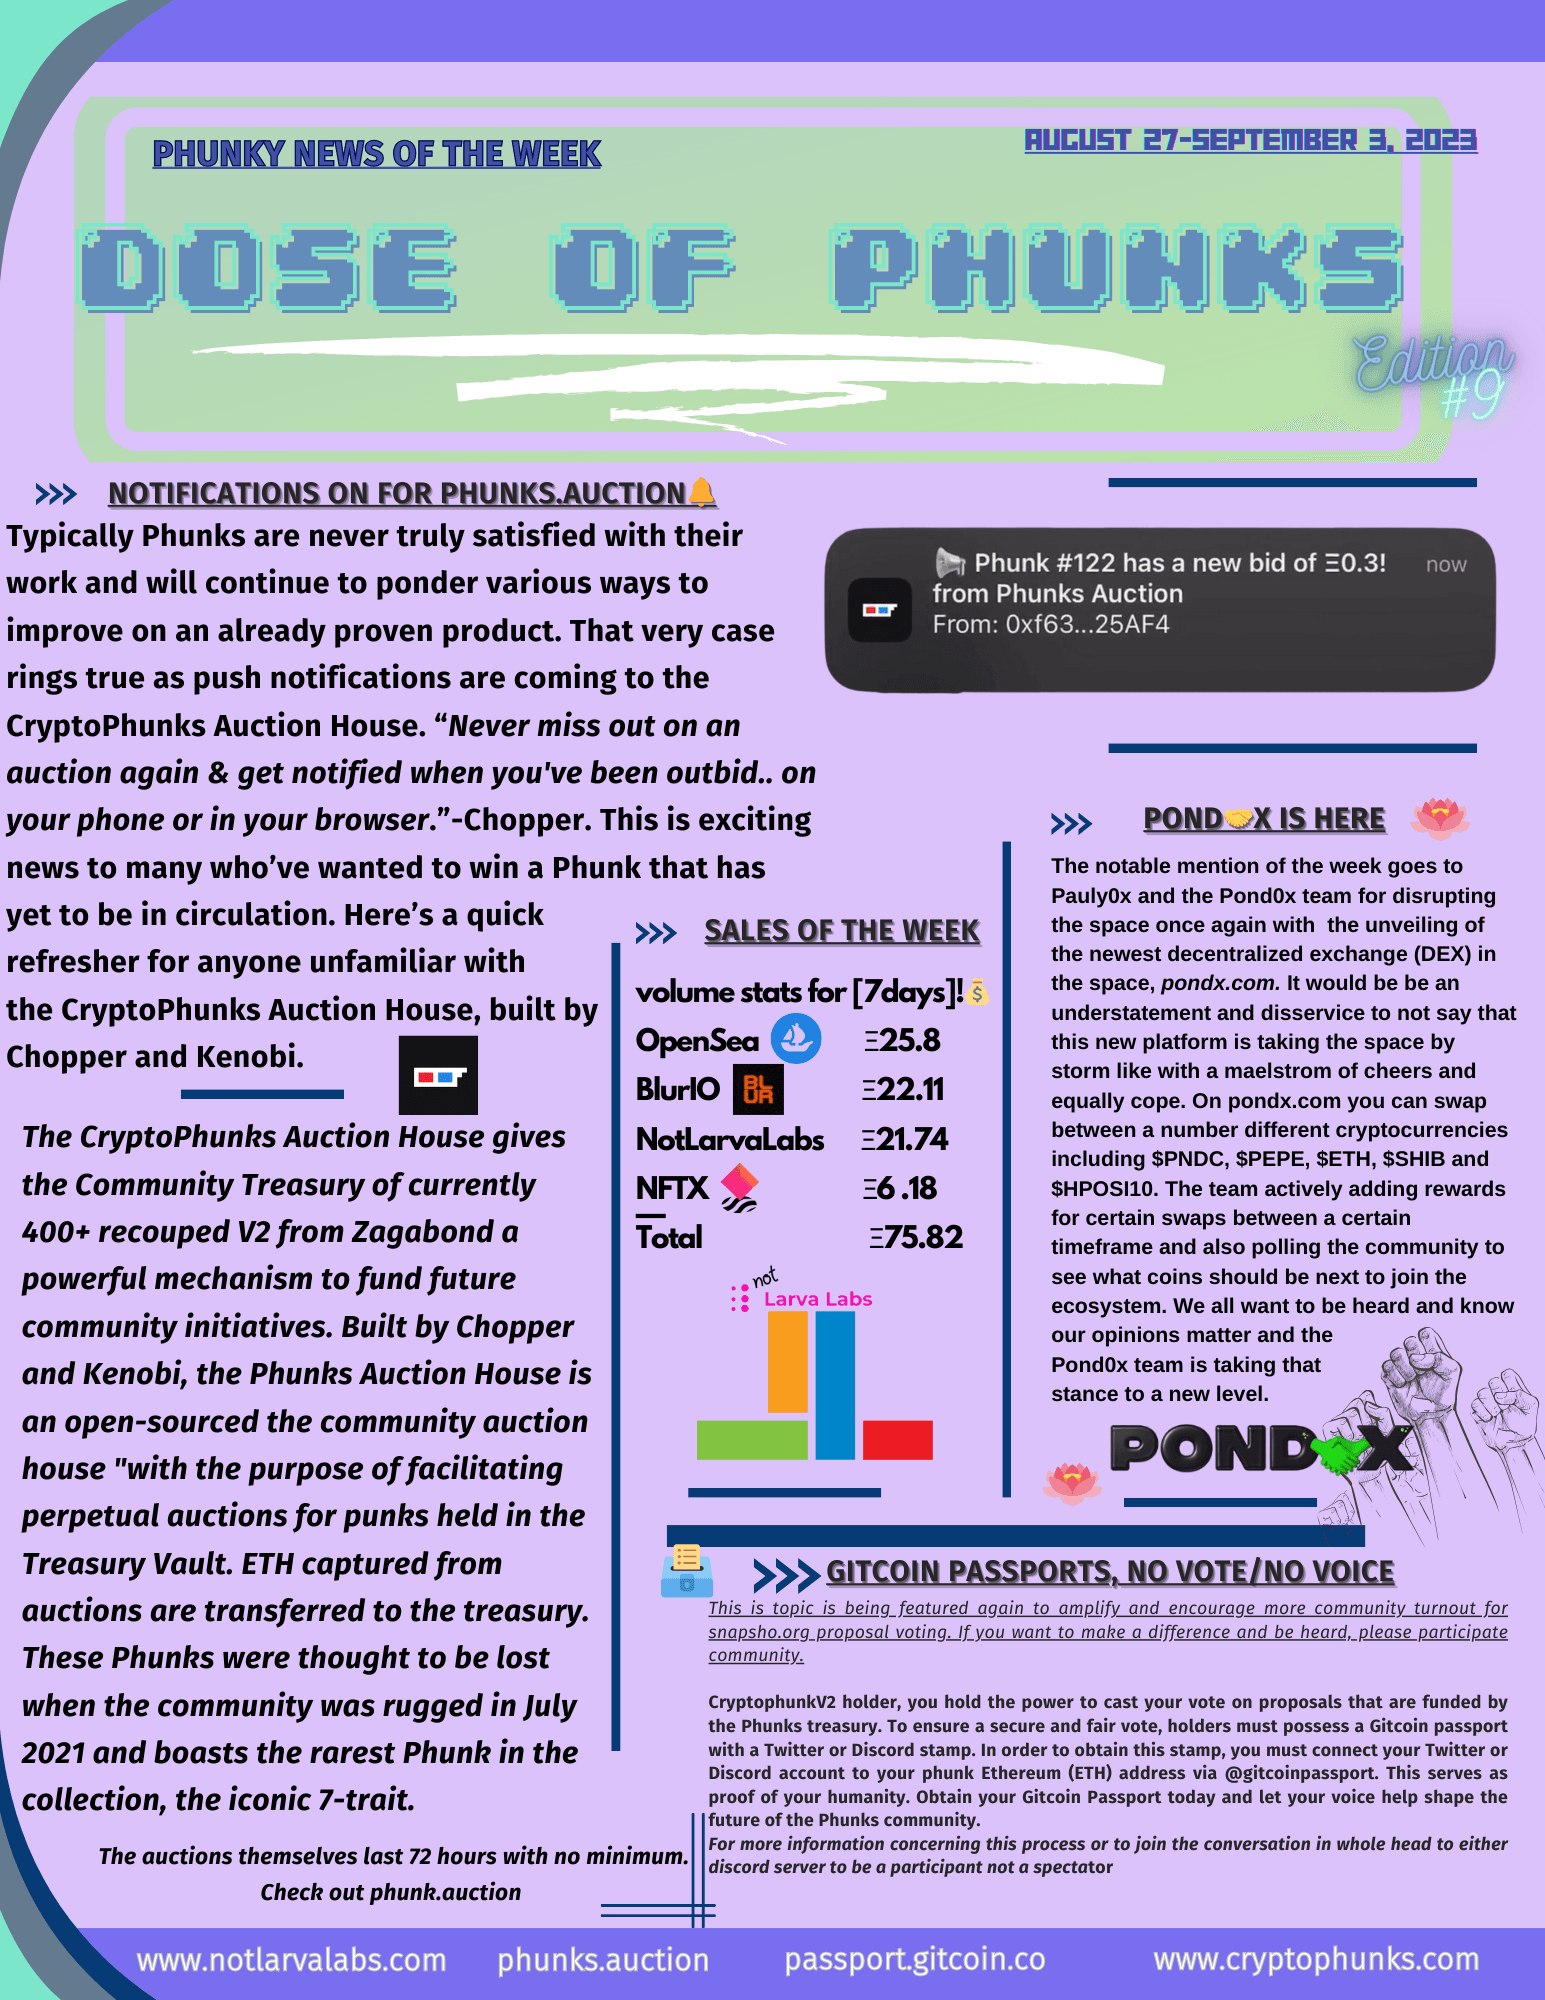 Dose of Phunks Edition 9